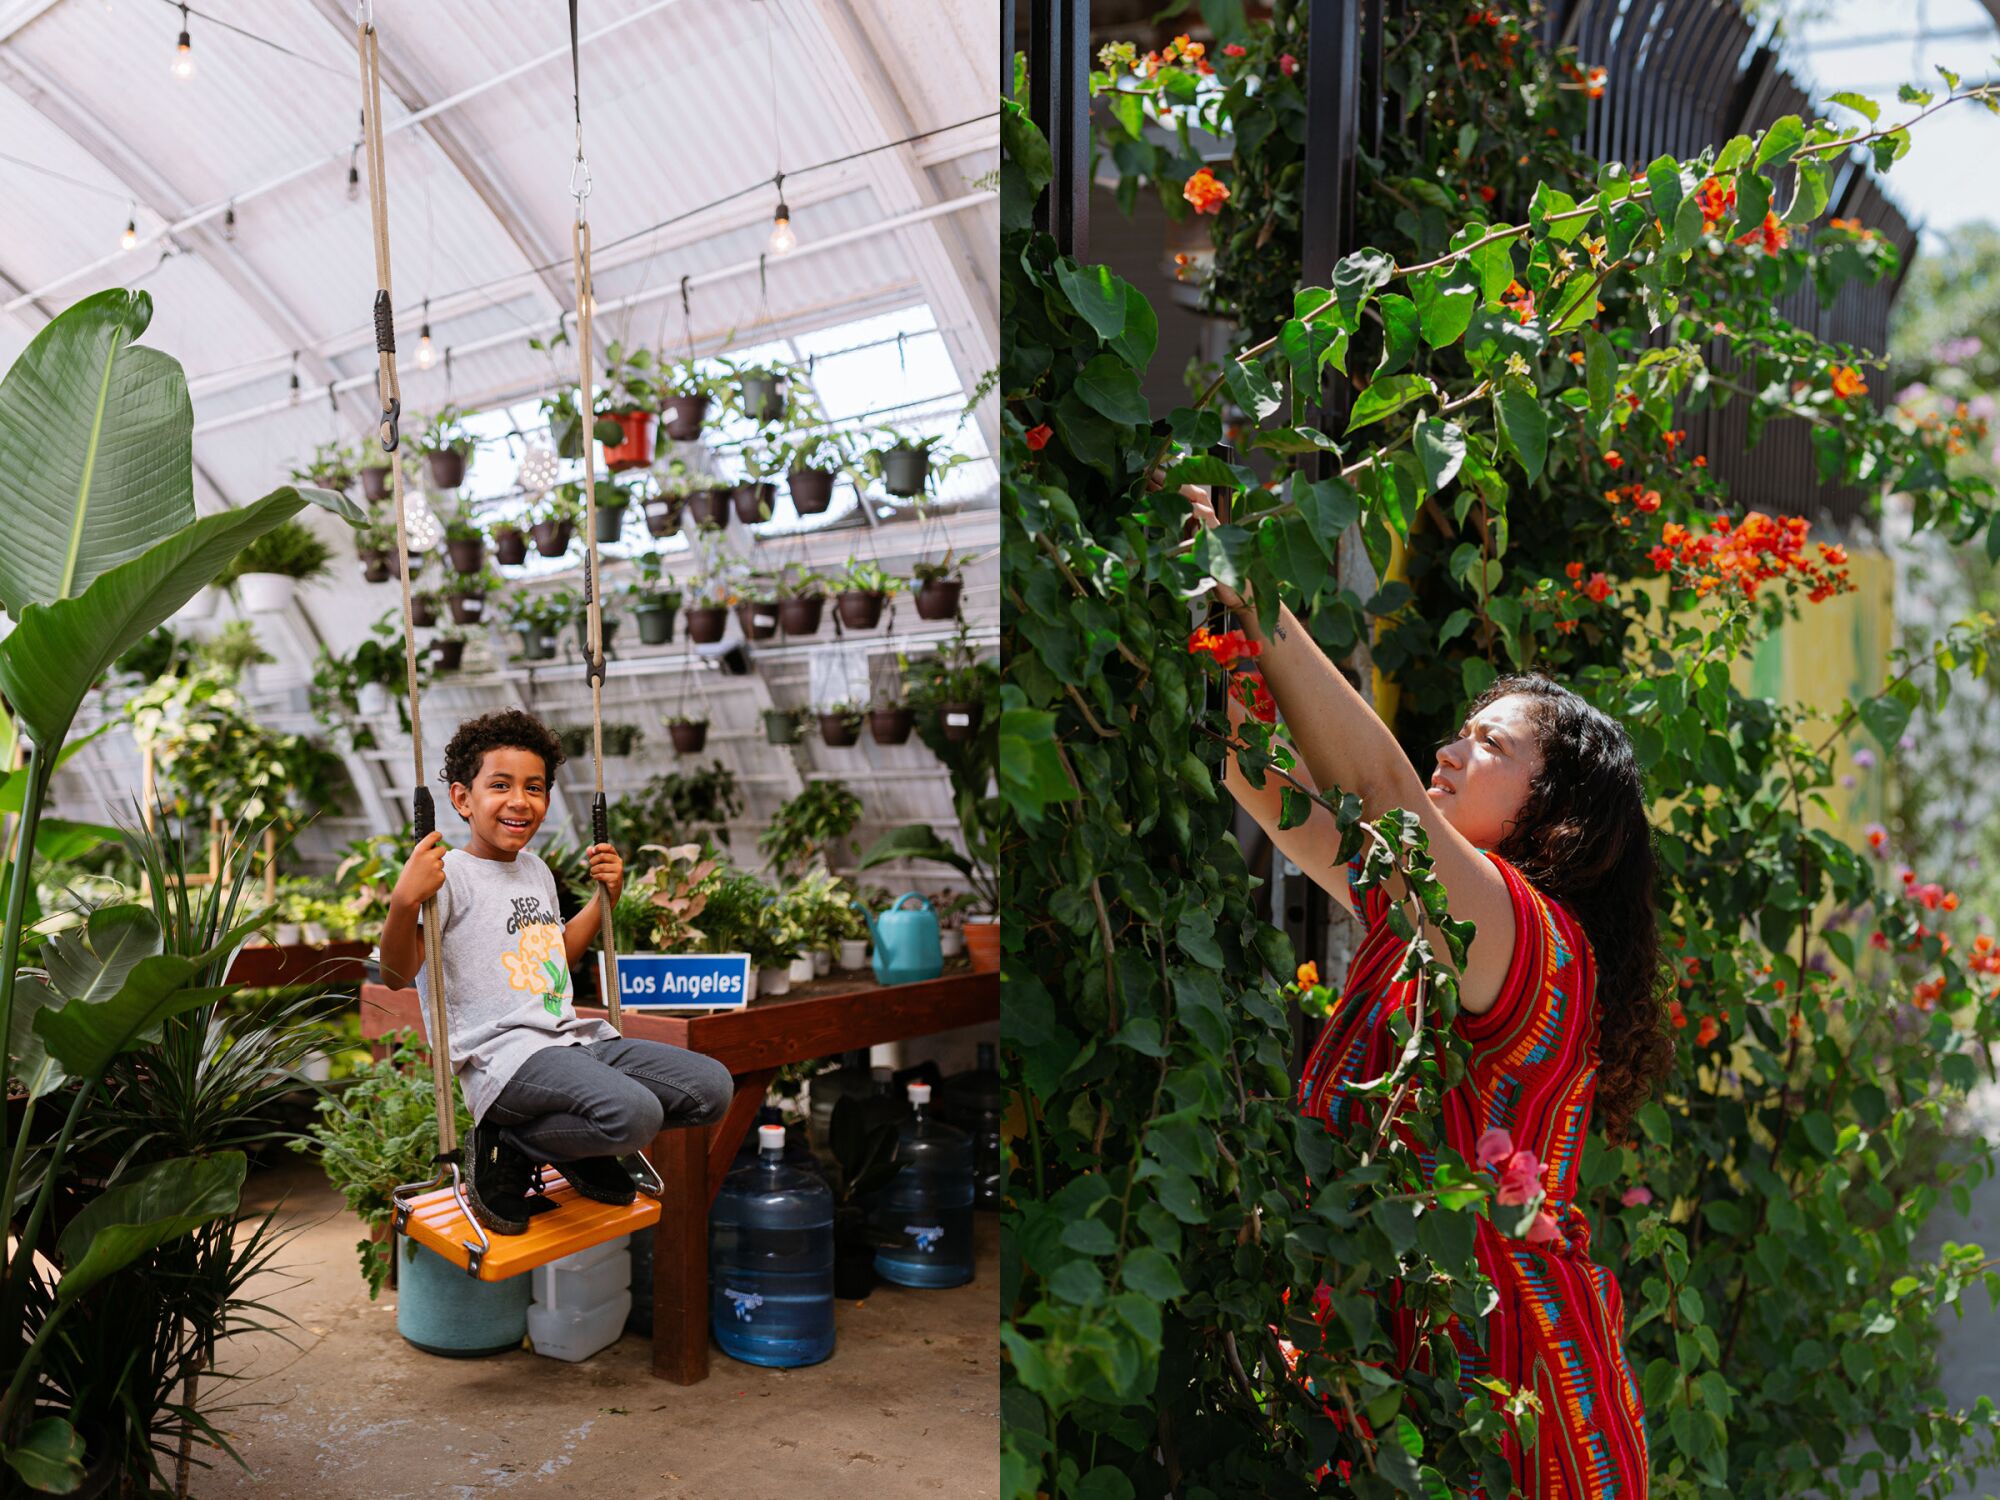 A boy on a swing in a plant-filled space; a woman rearranging parts of a flowering vine, right.